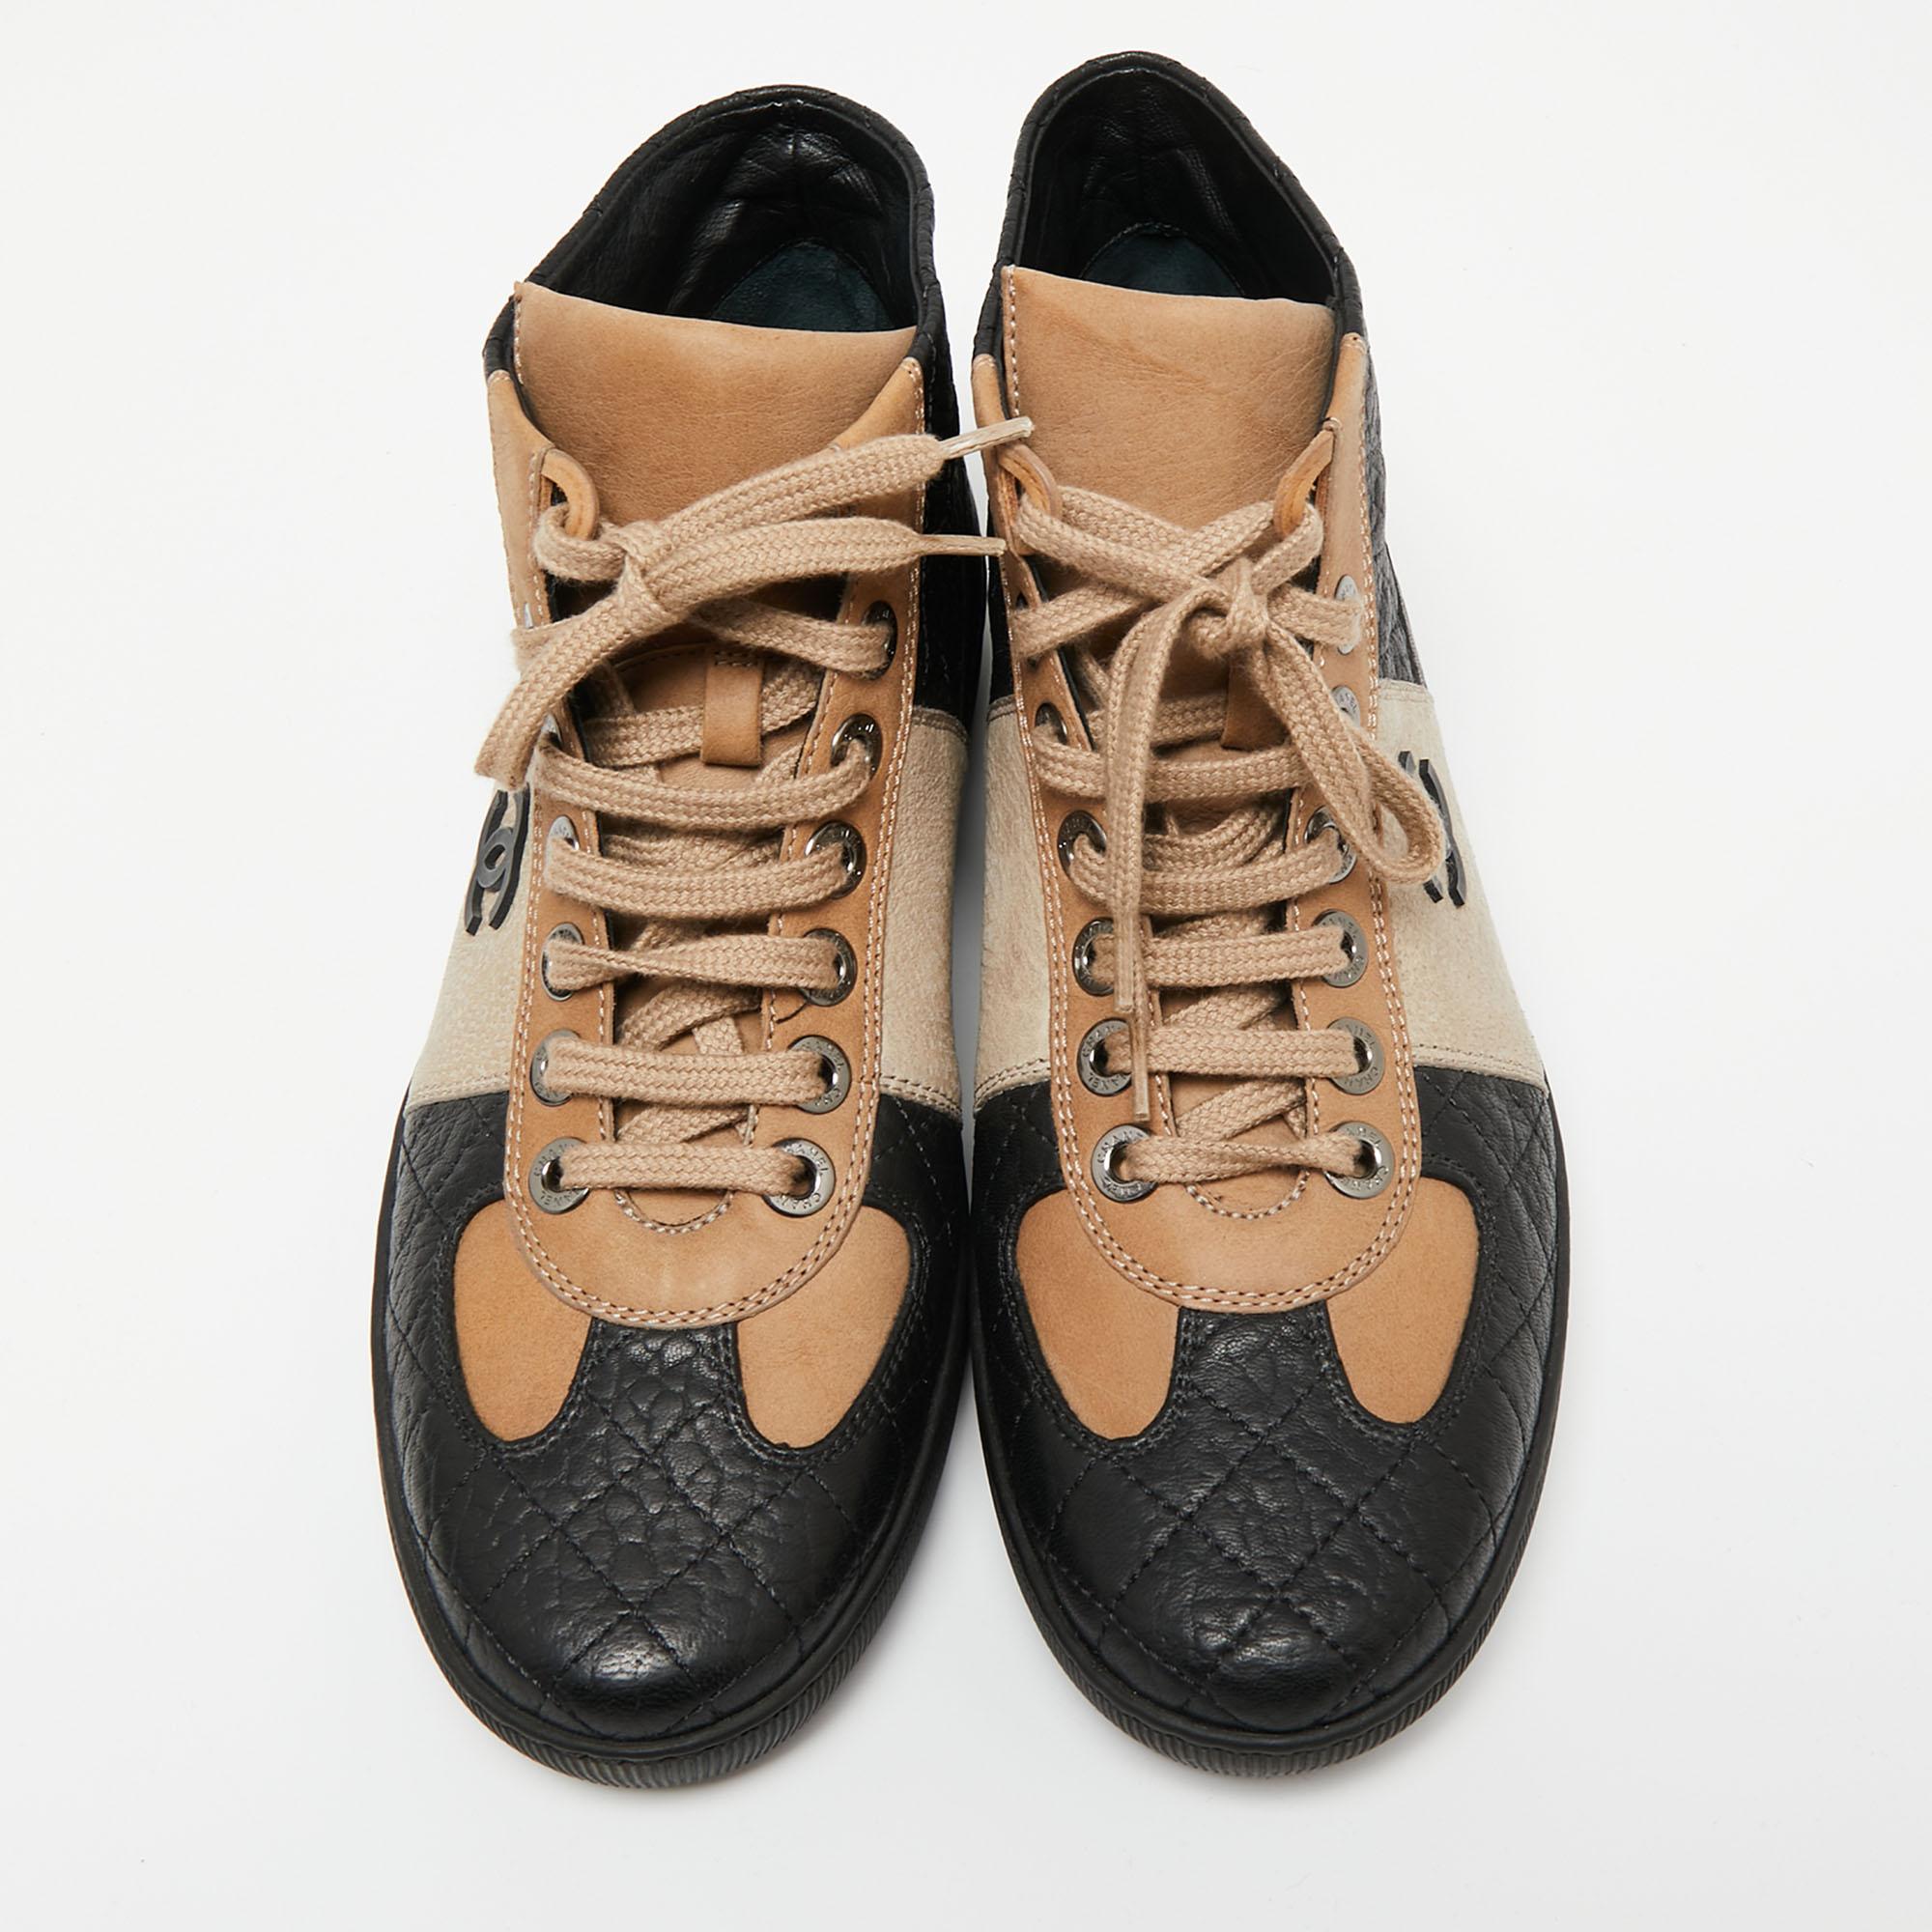 Complement your casual look with these high-top sneakers from the house of Chanel! Crafted from beige and black leather, these sneakers have simple lace-ups and notable elements like the CC logo and diamond quilt.

Includes: Original Dustbag